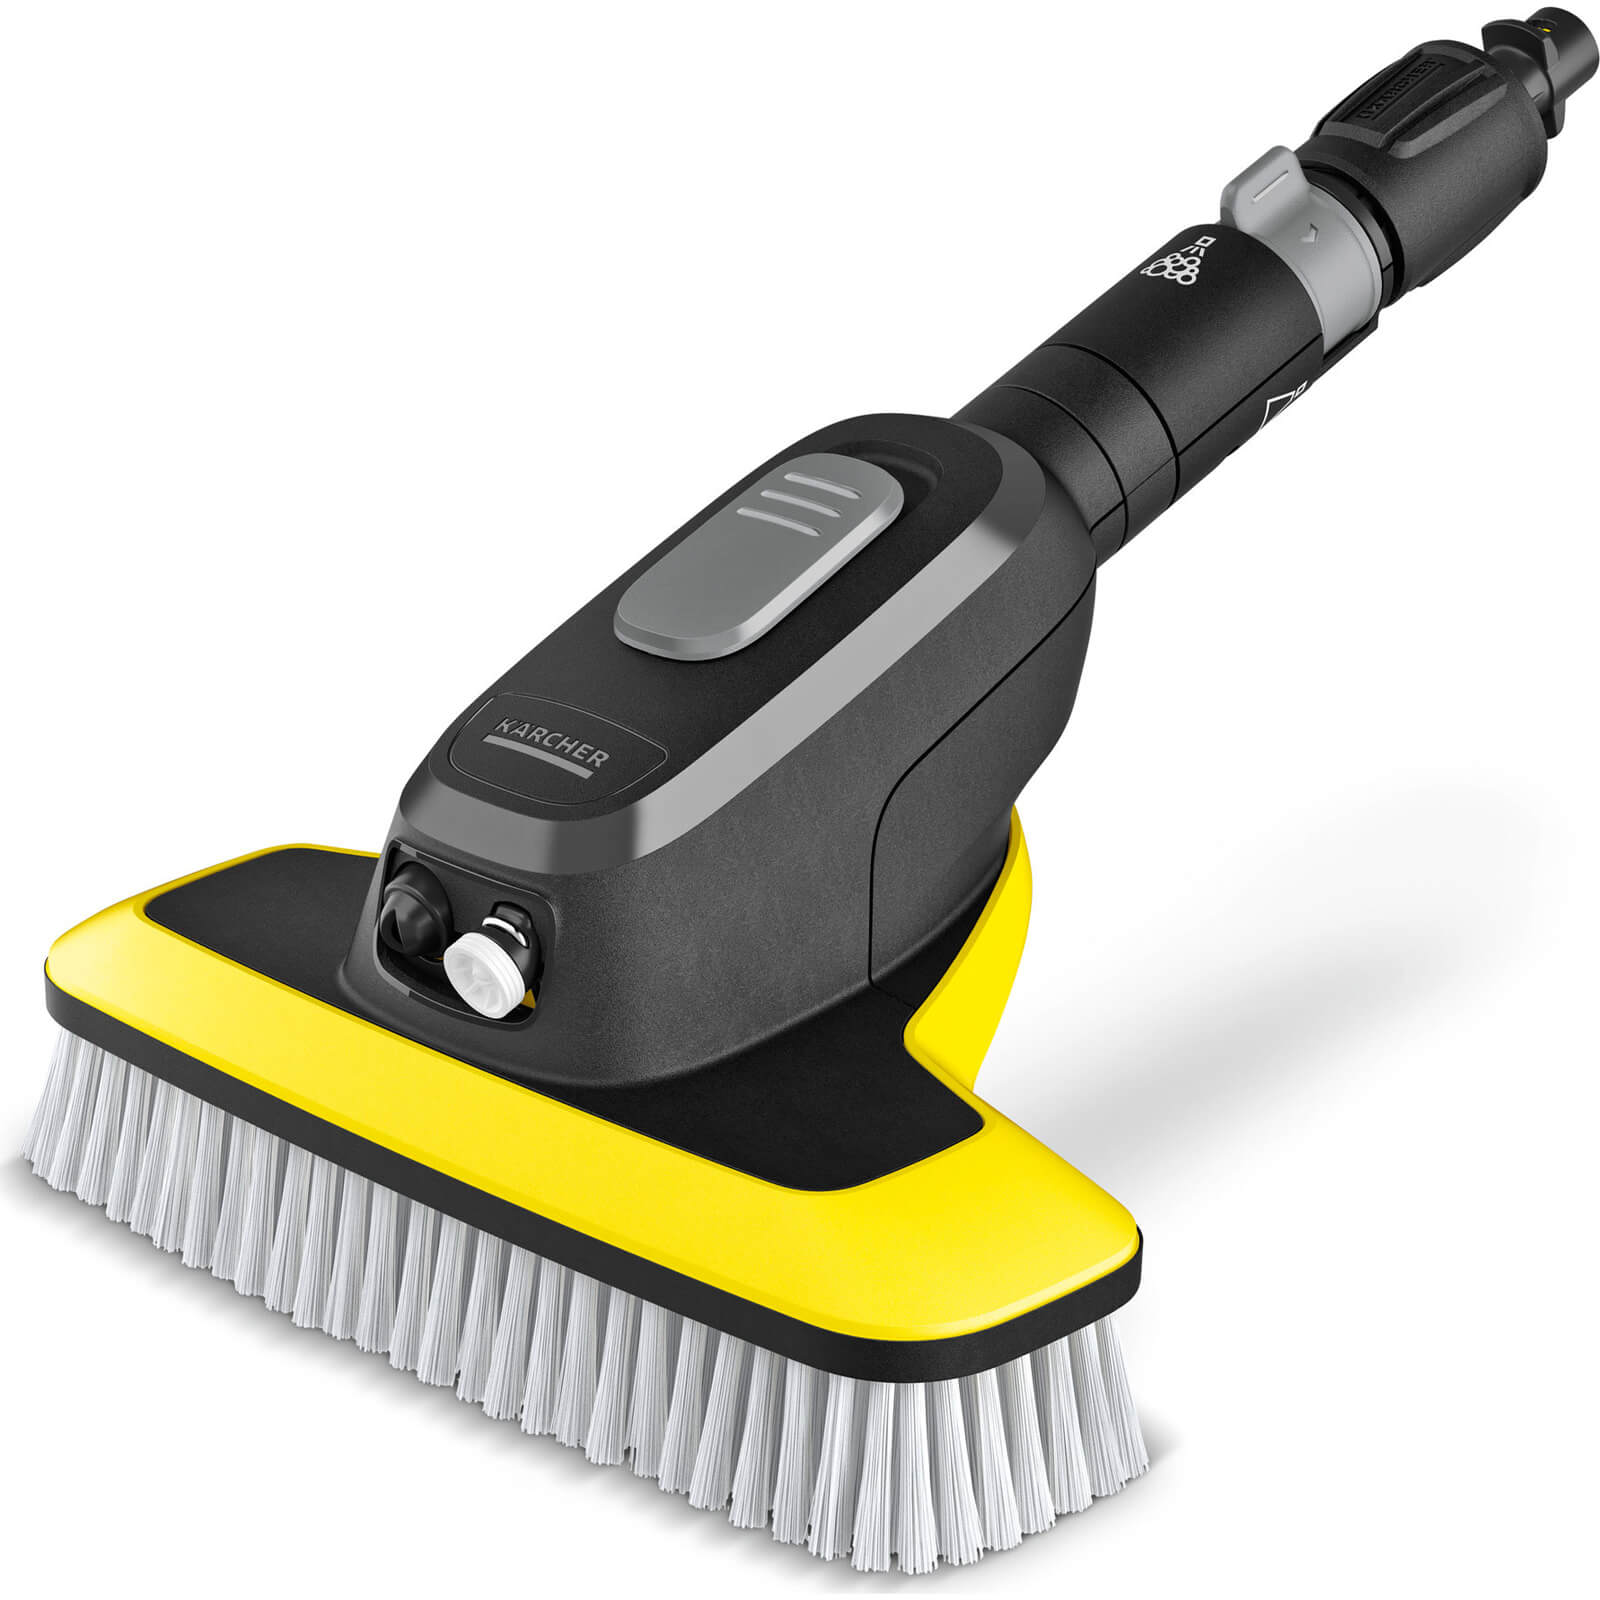 Image of Karcher WB 7 Plus 3 in 1 Wash Brush for K Pressure Washers